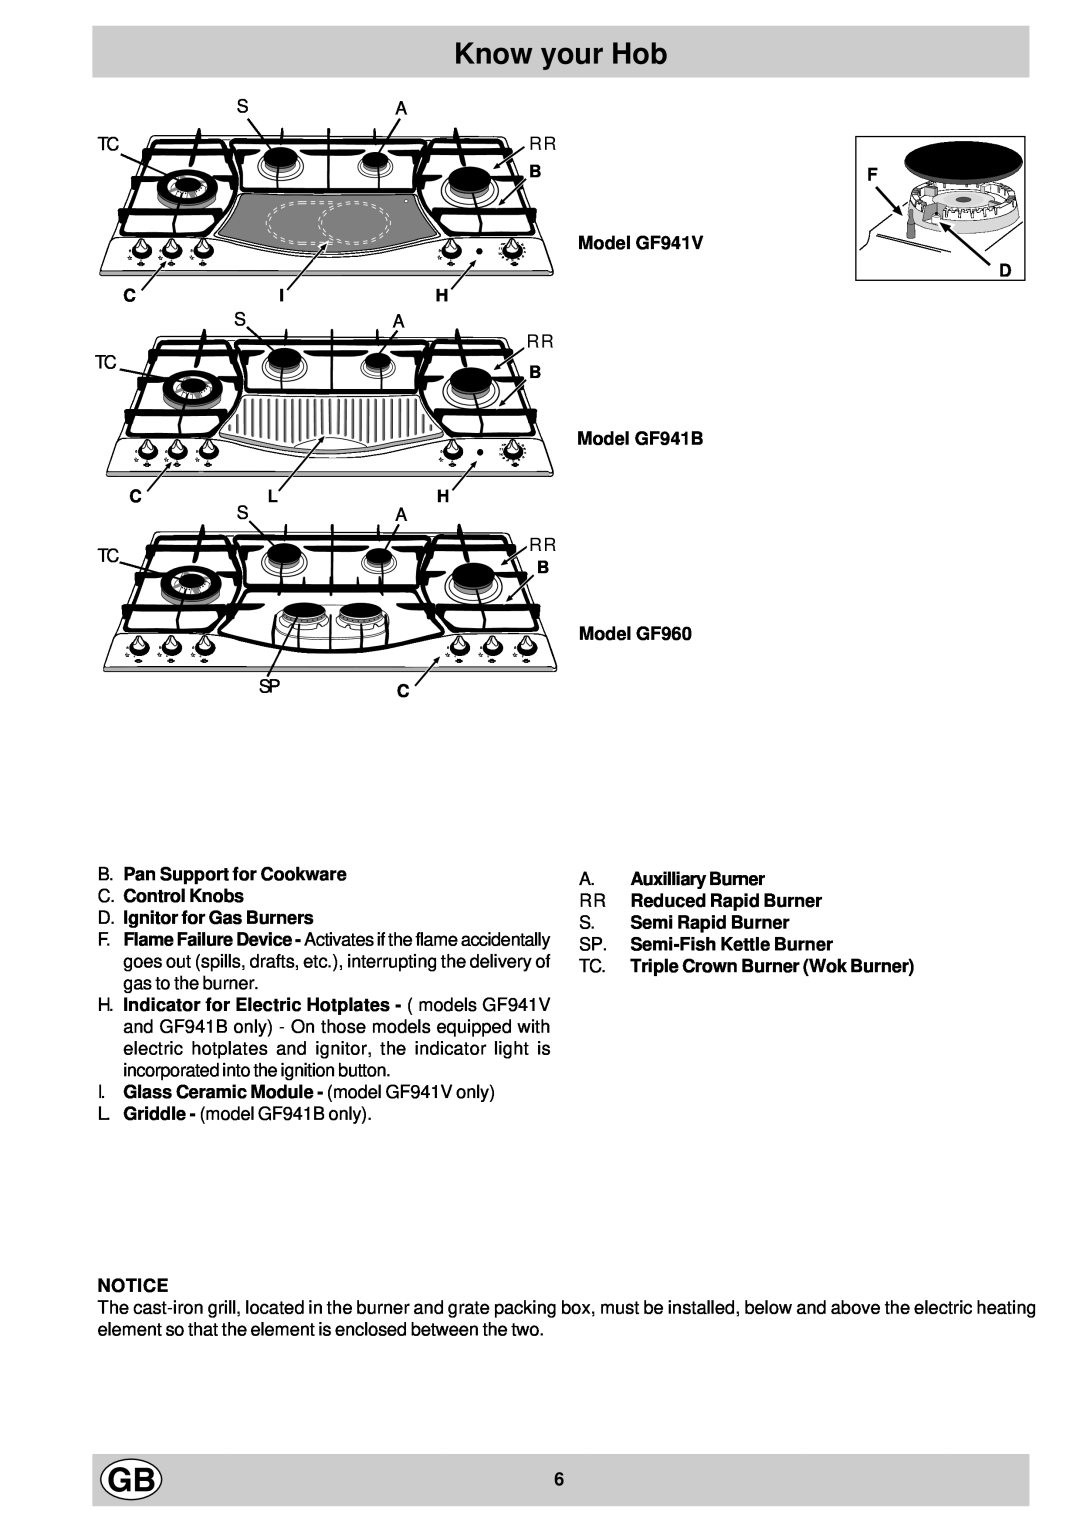 Hotpoint manual Know your Hob, Model GF941V, Model GF941B Model GF960, B.Pan Support for Cookware C.Control Knobs 